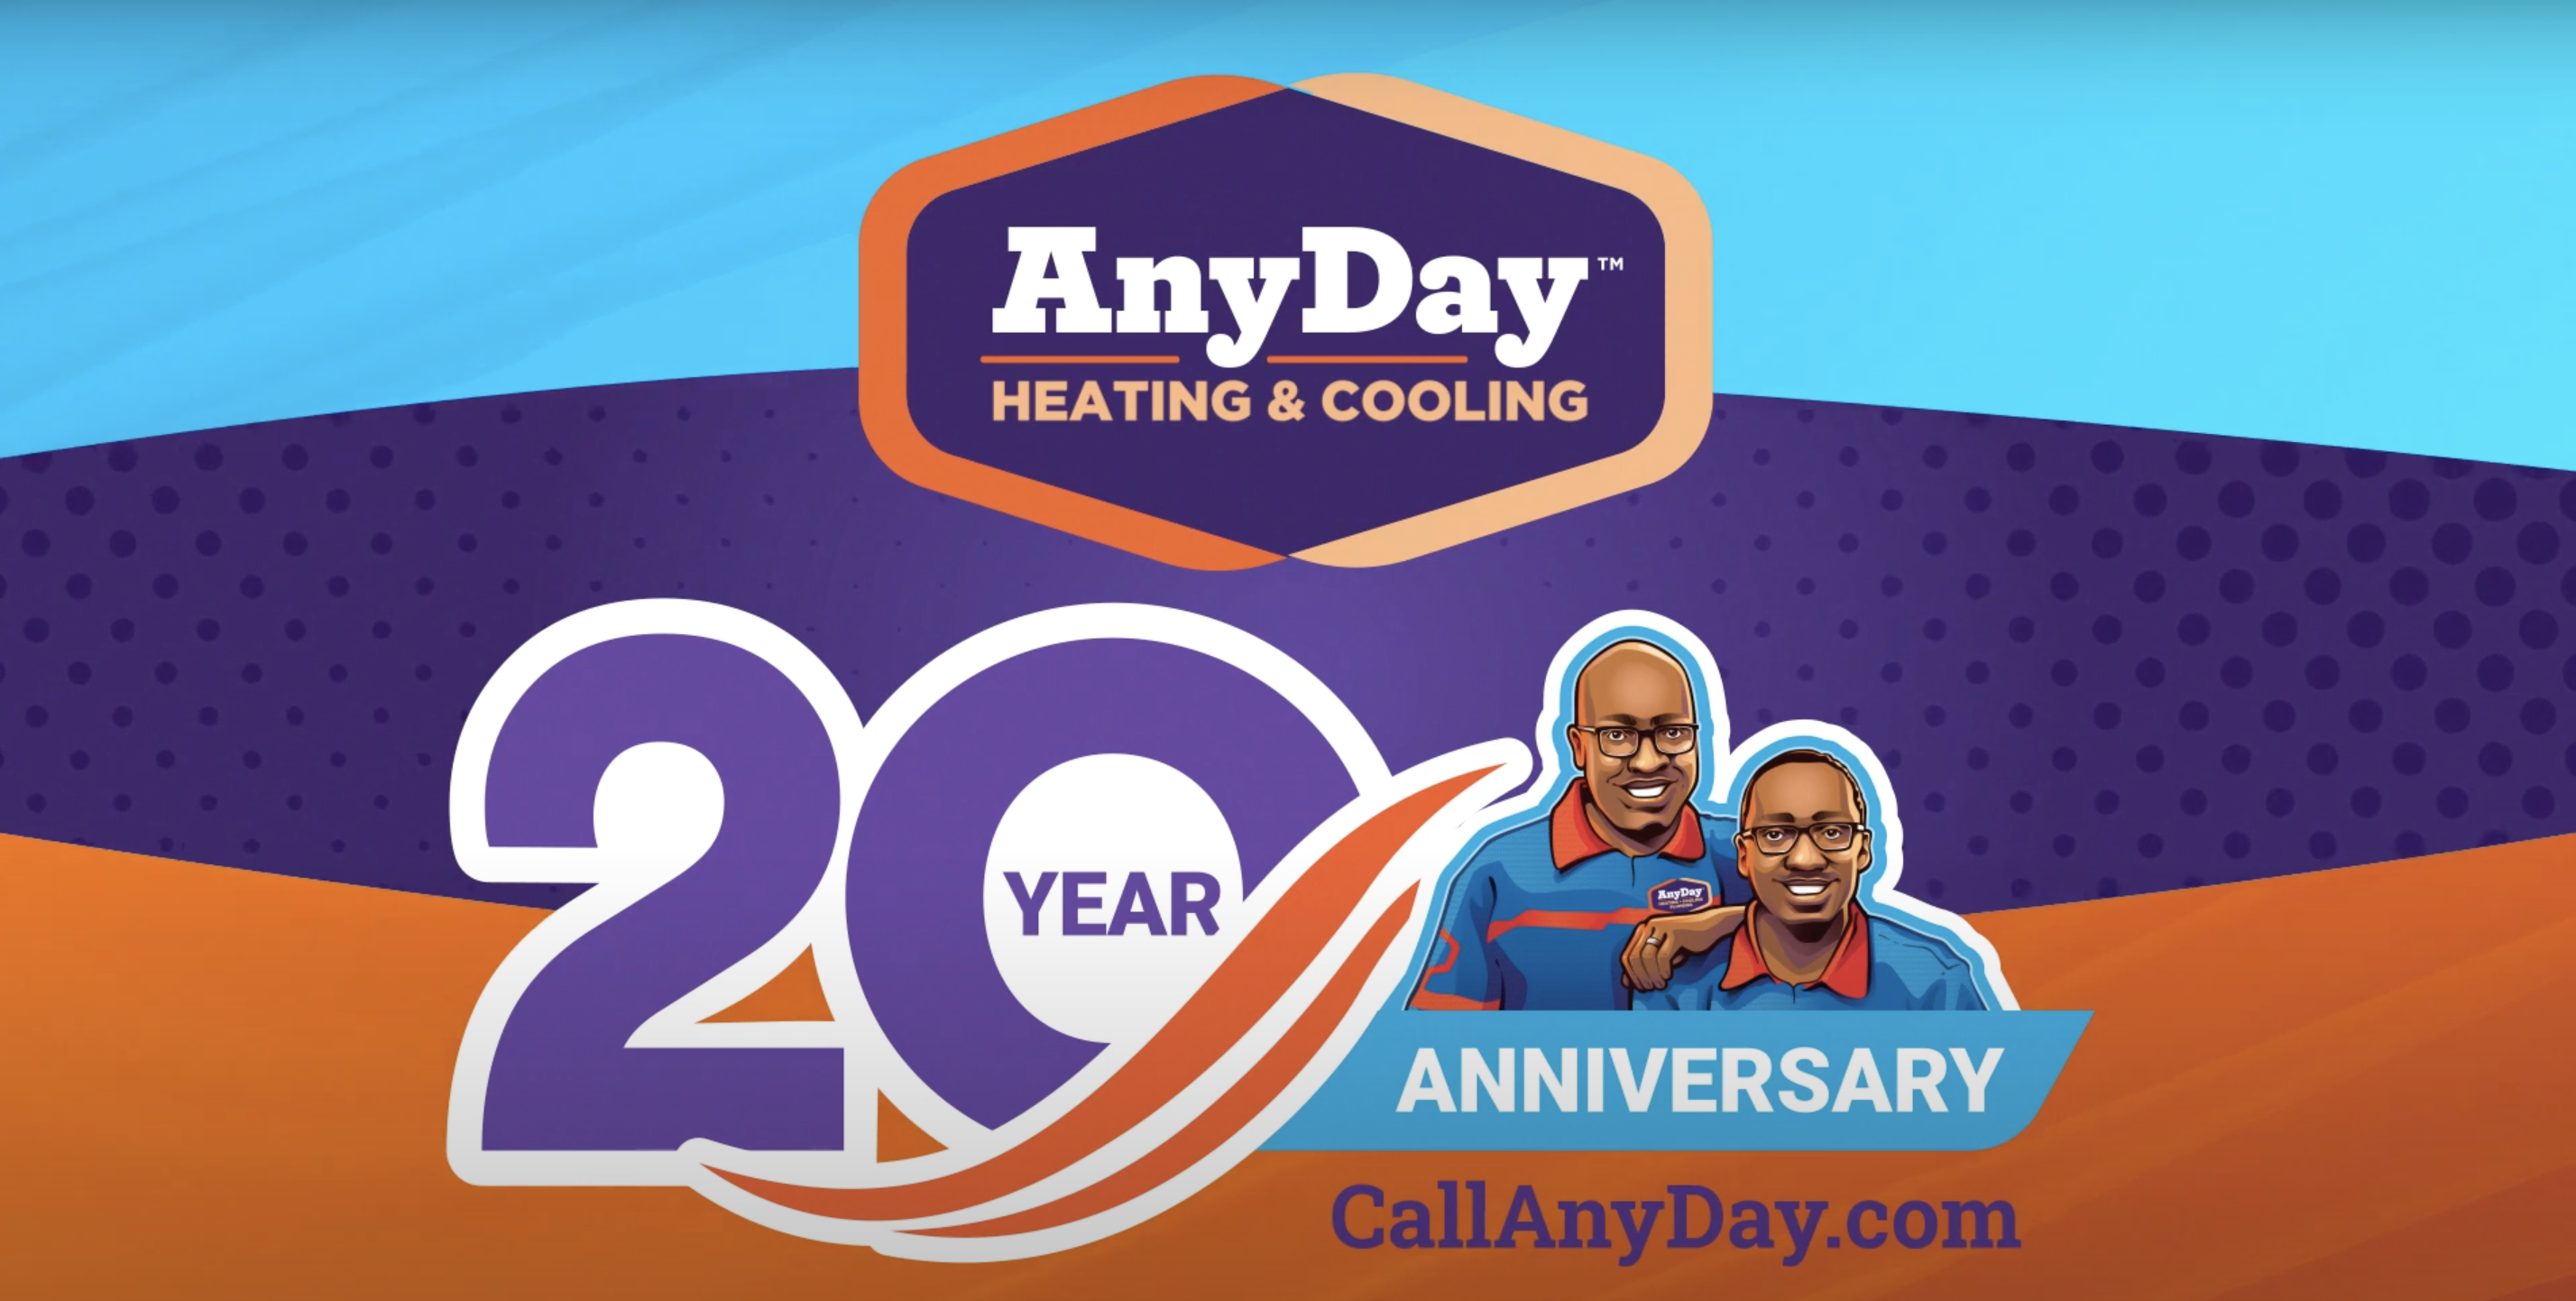 Adrian Stephenson Owner And Founder AnyDay Heating & Cooling